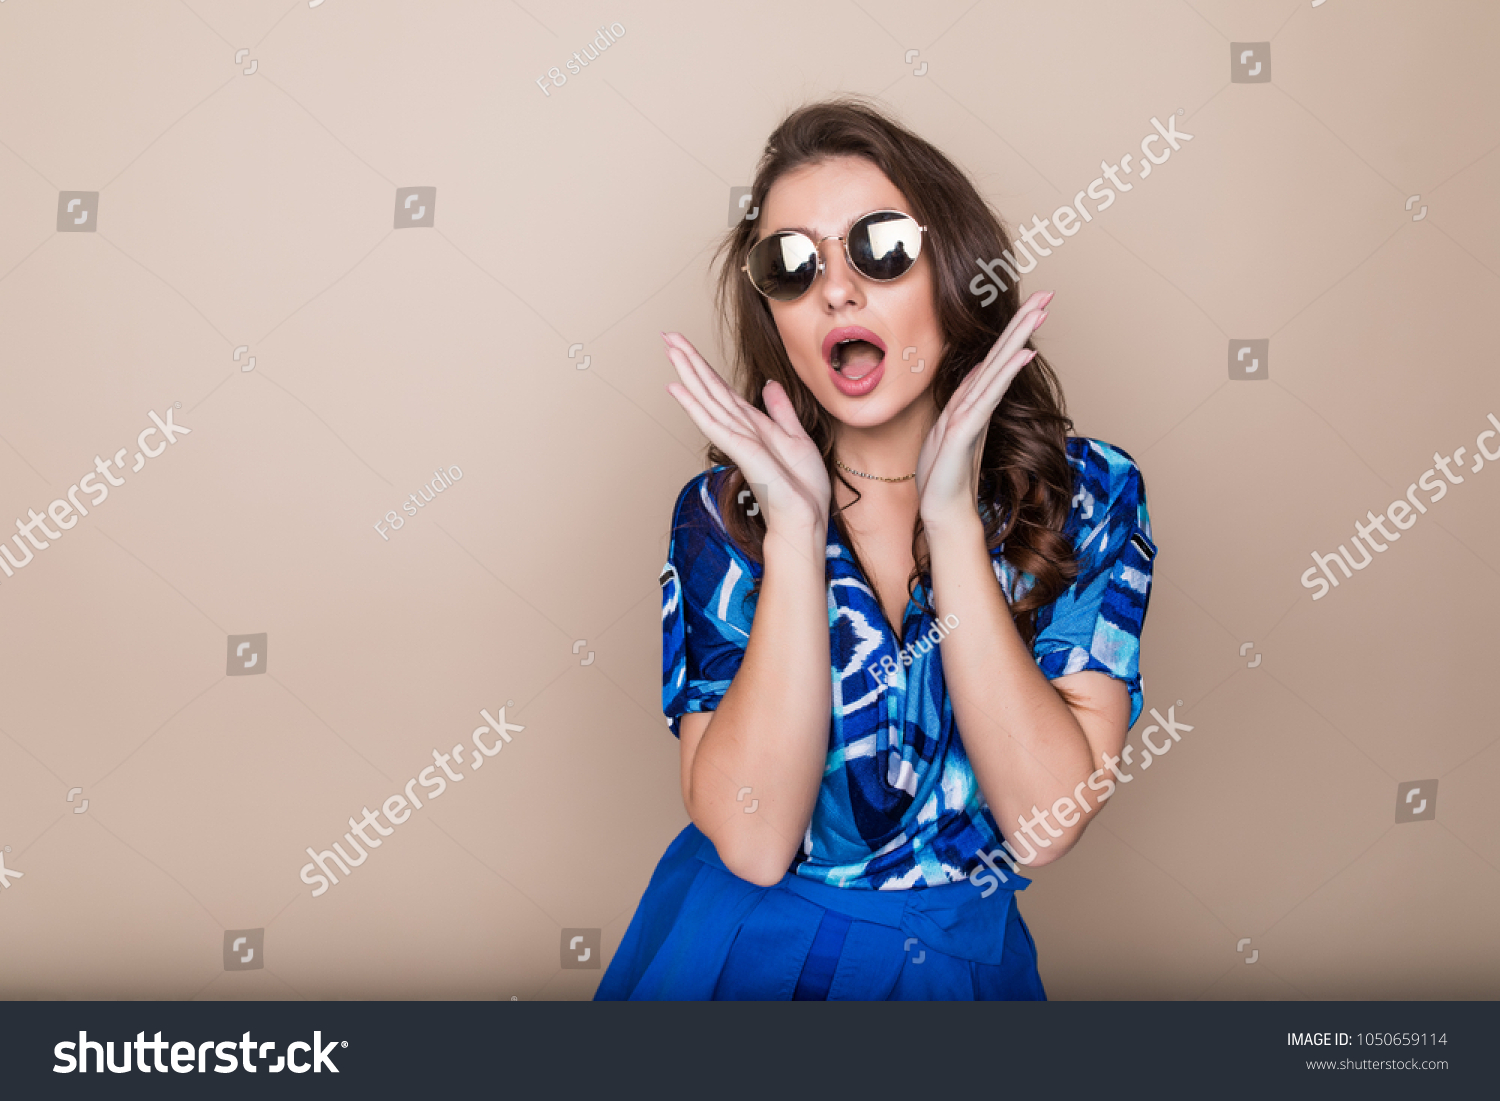 Happy woman in sunglasses looking excited look at the camera on color studio background. Body language #1050659114